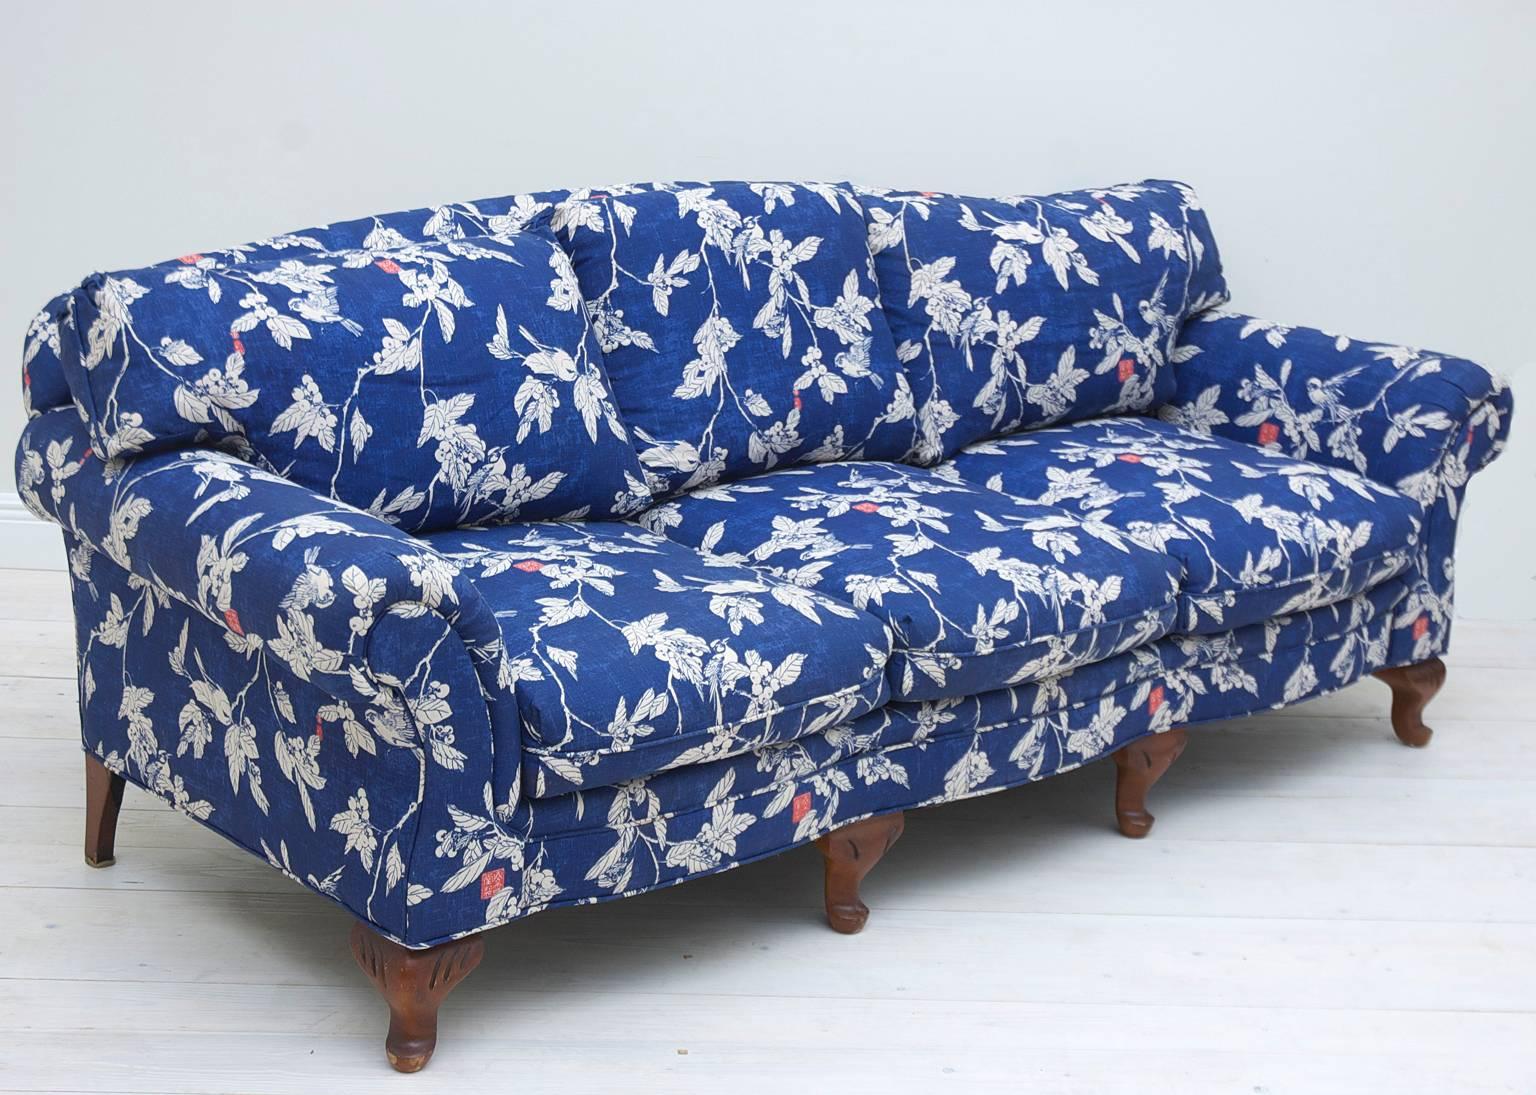 Classic Pearson sofa frame upholstered with R.P. Miller Textile NYC fabric handwoven Belgium linen. 
This textile collection is based on 18th and 19th century Japanese woodblock prints. The fabric is hand printed in Los Angeles on beautiful Belgian